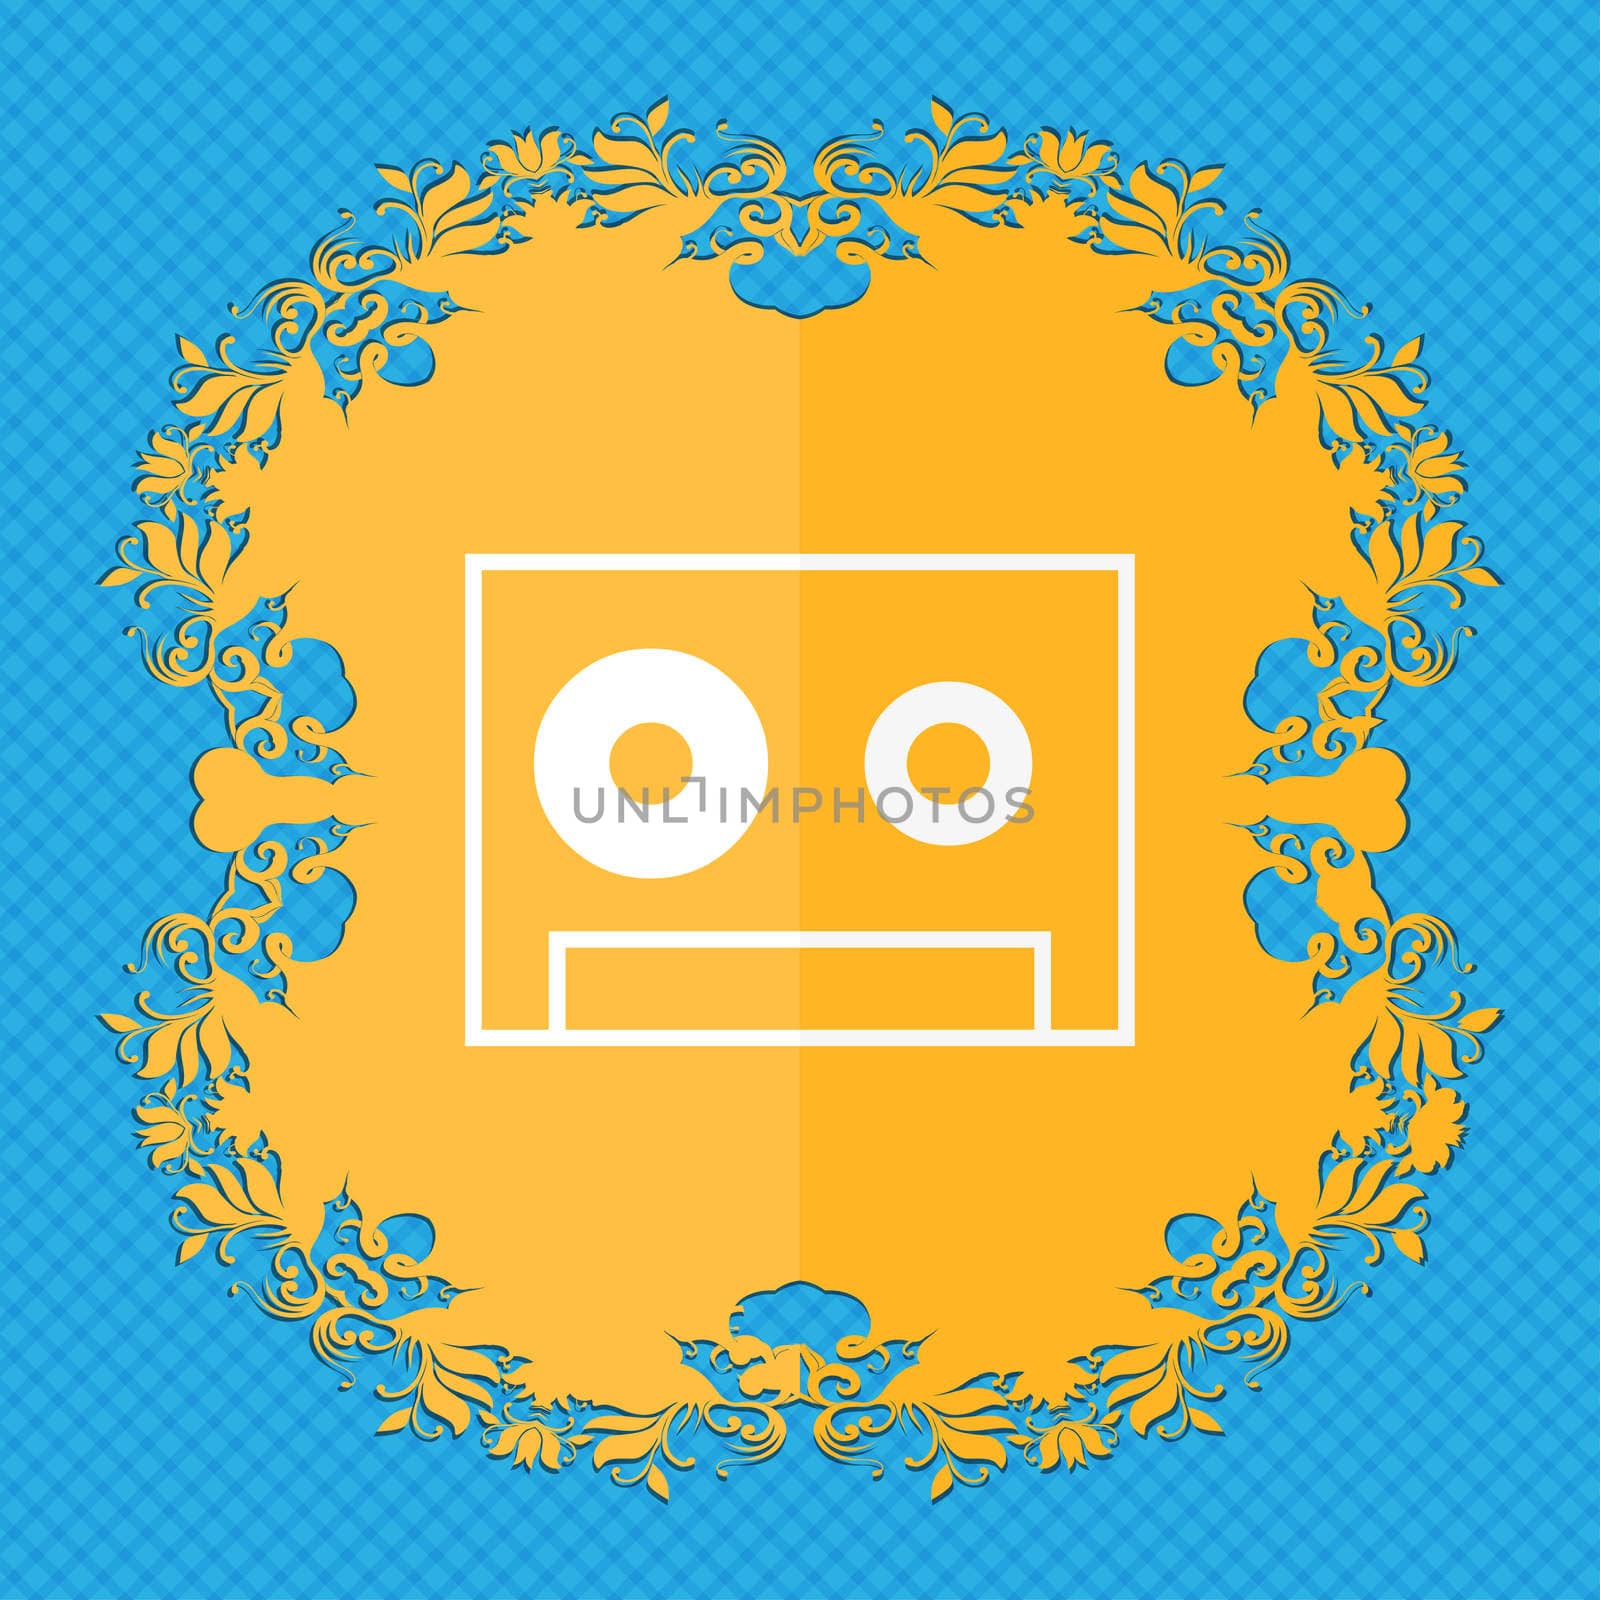 cassette sign icon. Audiocassette symbol. Floral flat design on a blue abstract background with place for your text. illustration